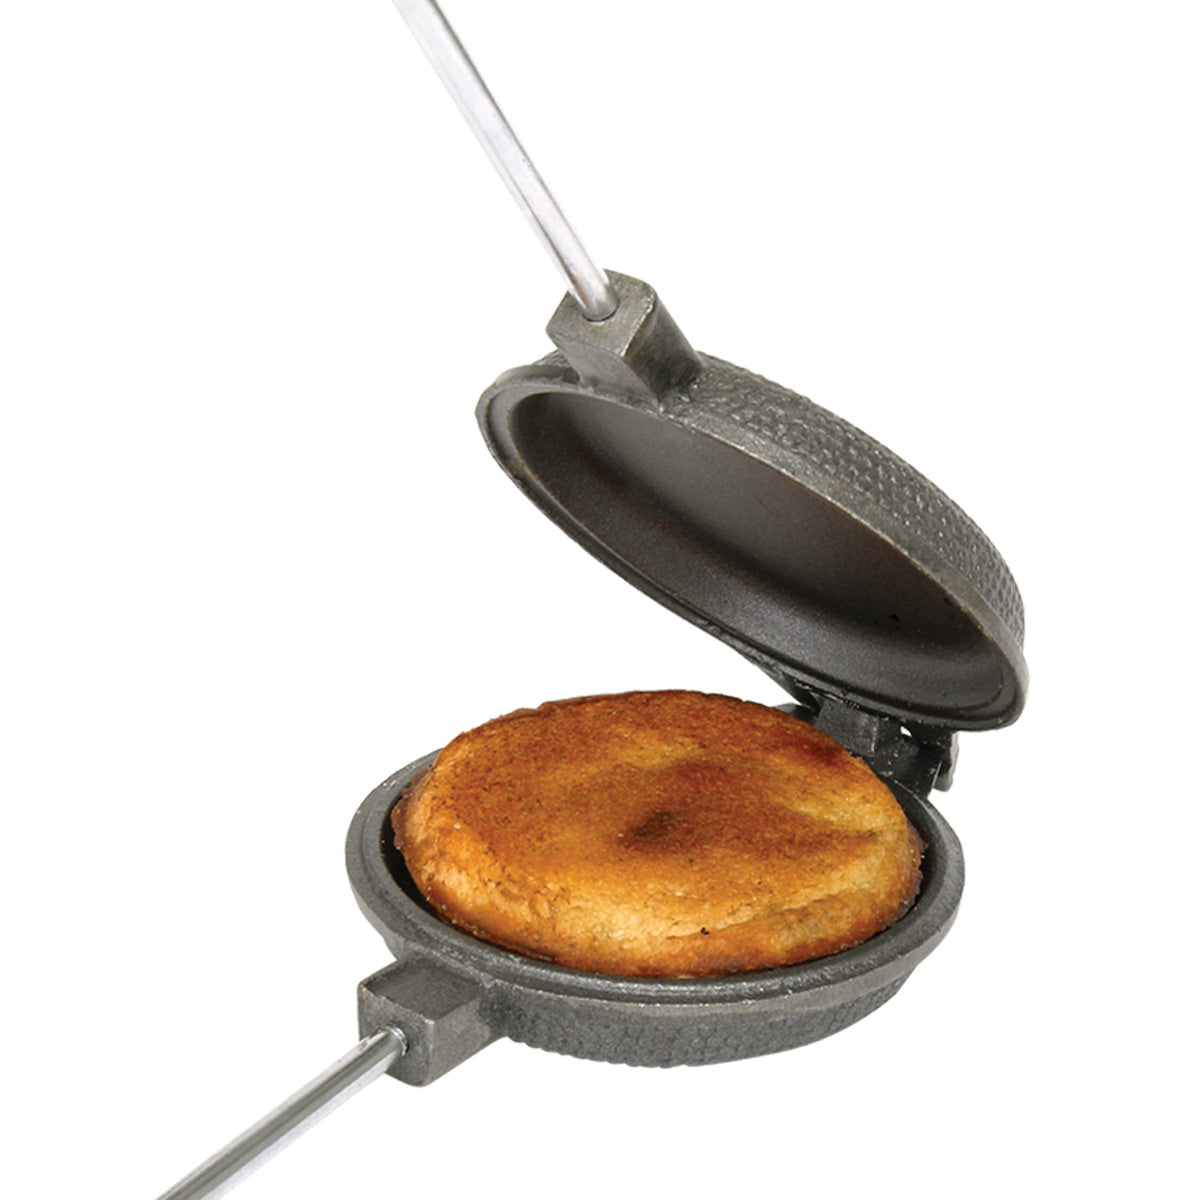 Pie Irons: What Are They and How Do You Use Them?